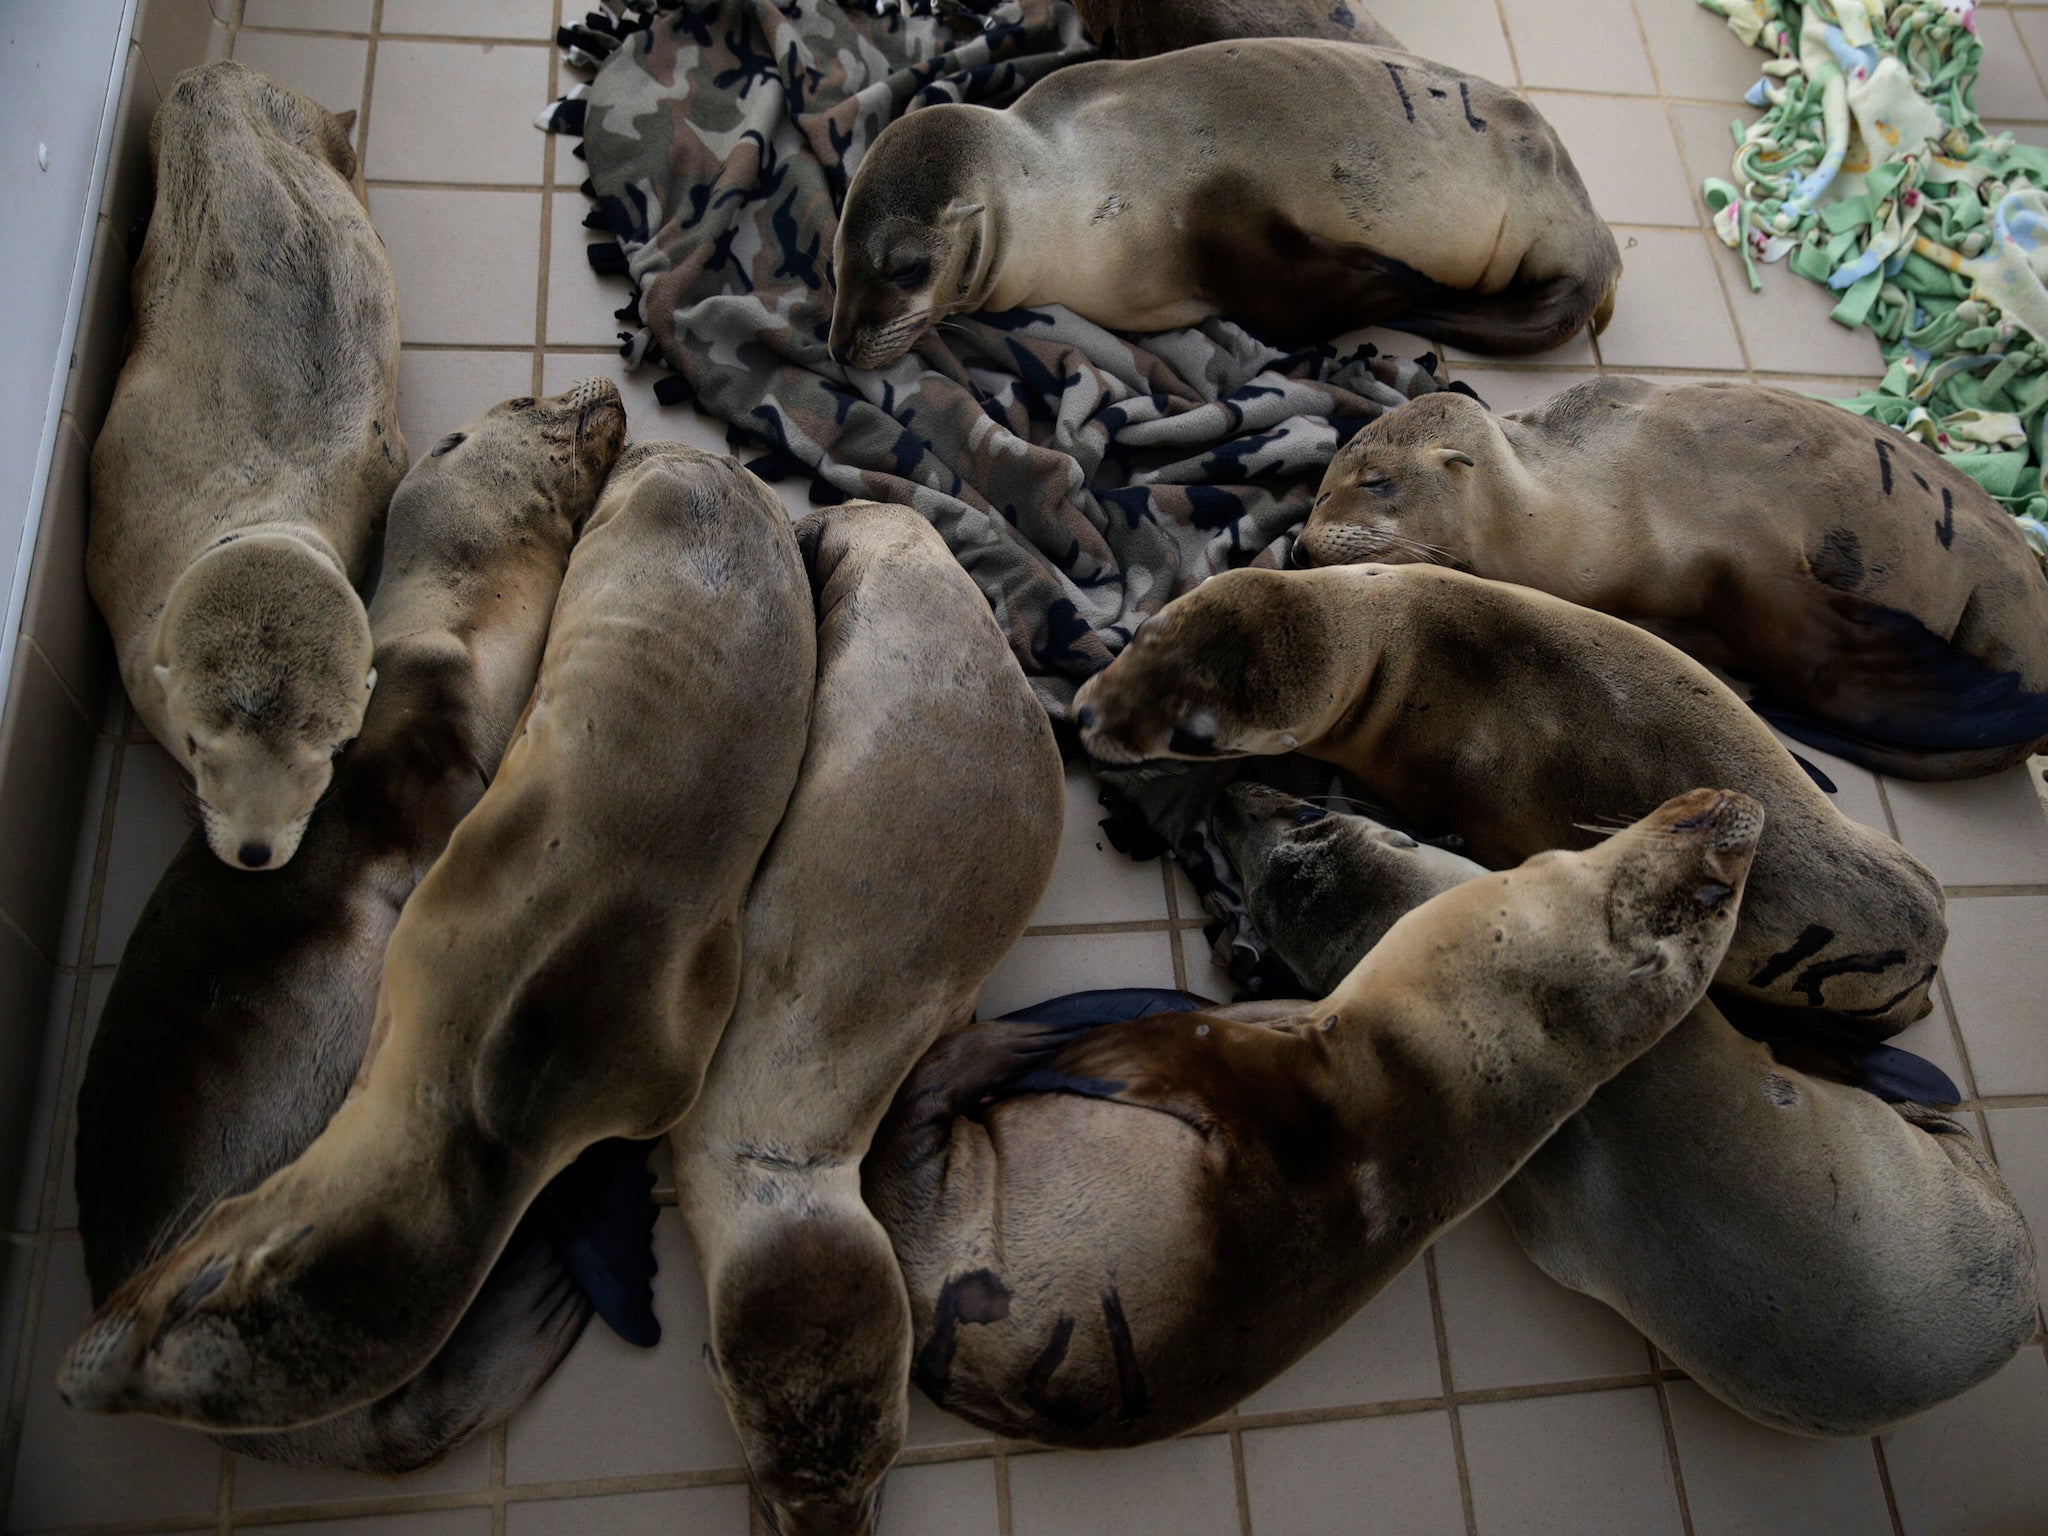 Rescue centres in California have been inundated with starving sea lion pups